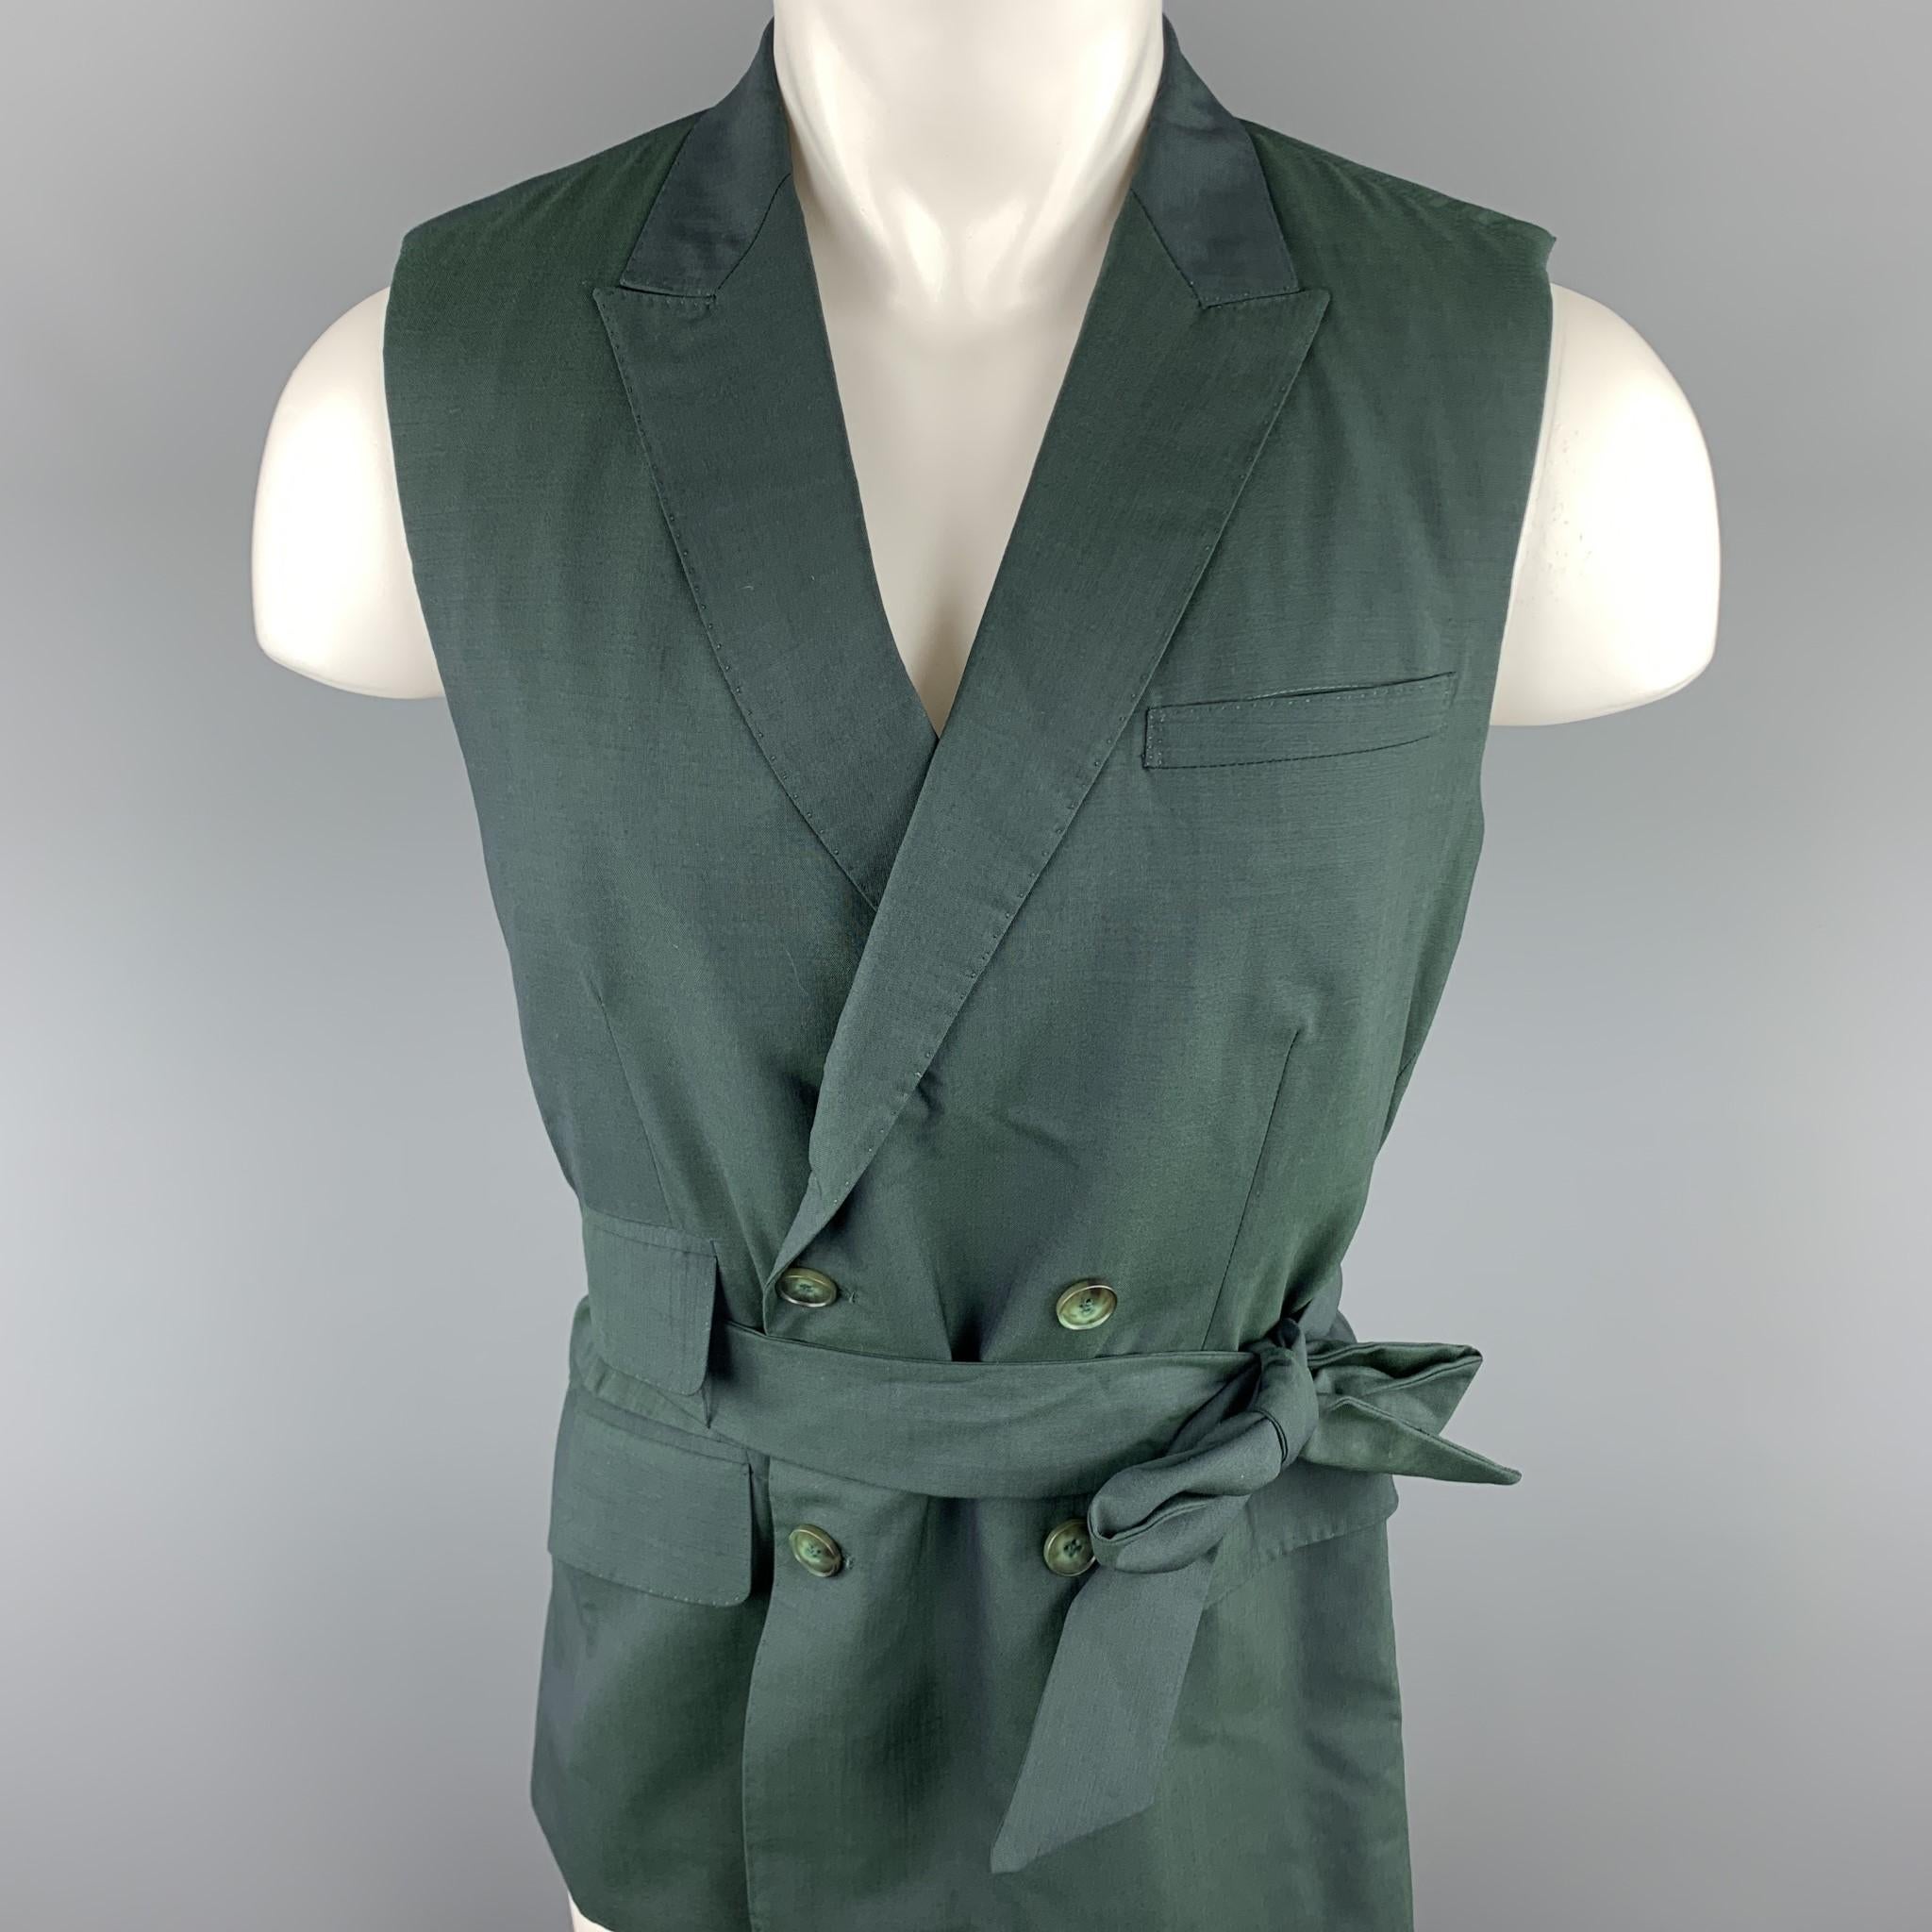 CARLOS CAMPOS vest comes in a forest green wool featuring a belted style, peak lapel, flap pockets, and a double breasted closure. 

Very Good Pre-Owned Condition.
Marked: No Size Marked 

Measurements:

Shoulder: 15 in. 
Chest: 38 in. 
Length: 30